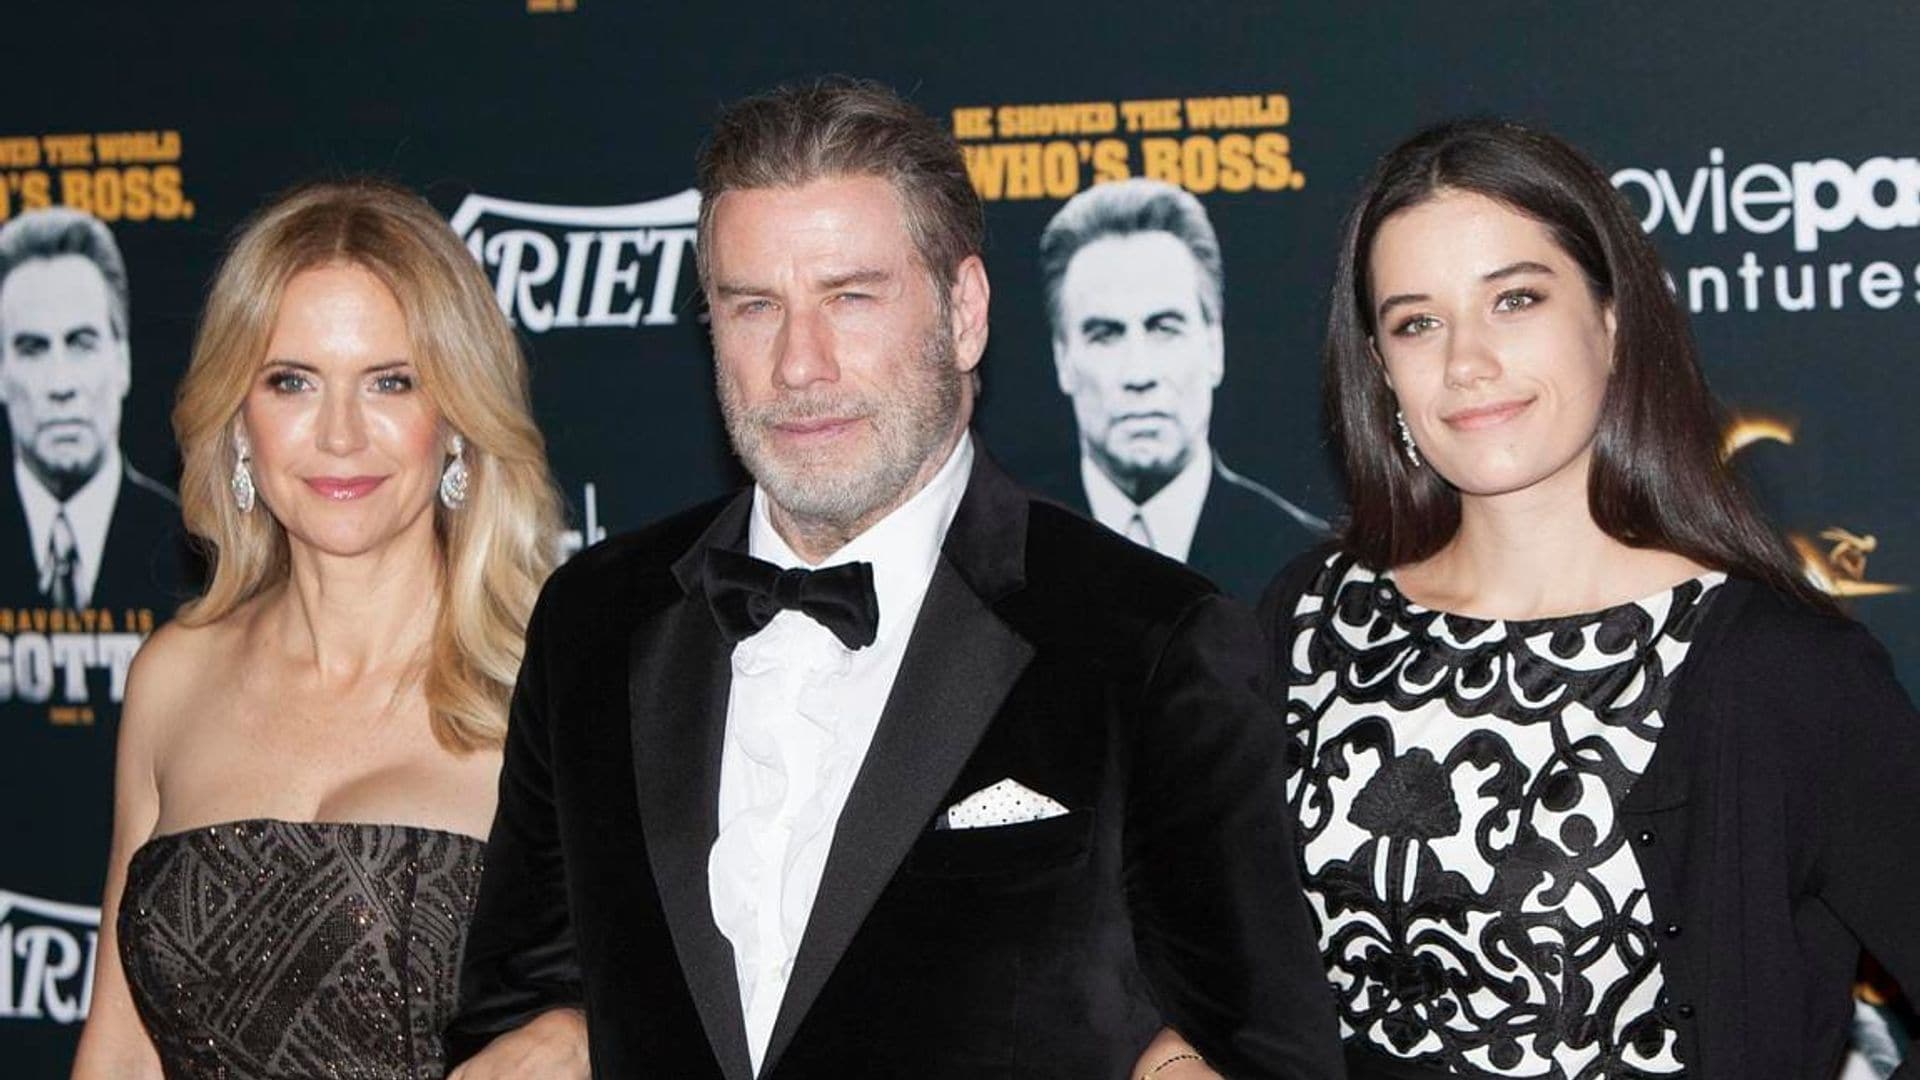 John Travolta’s first family picture since his wife Kelly Preston’s death